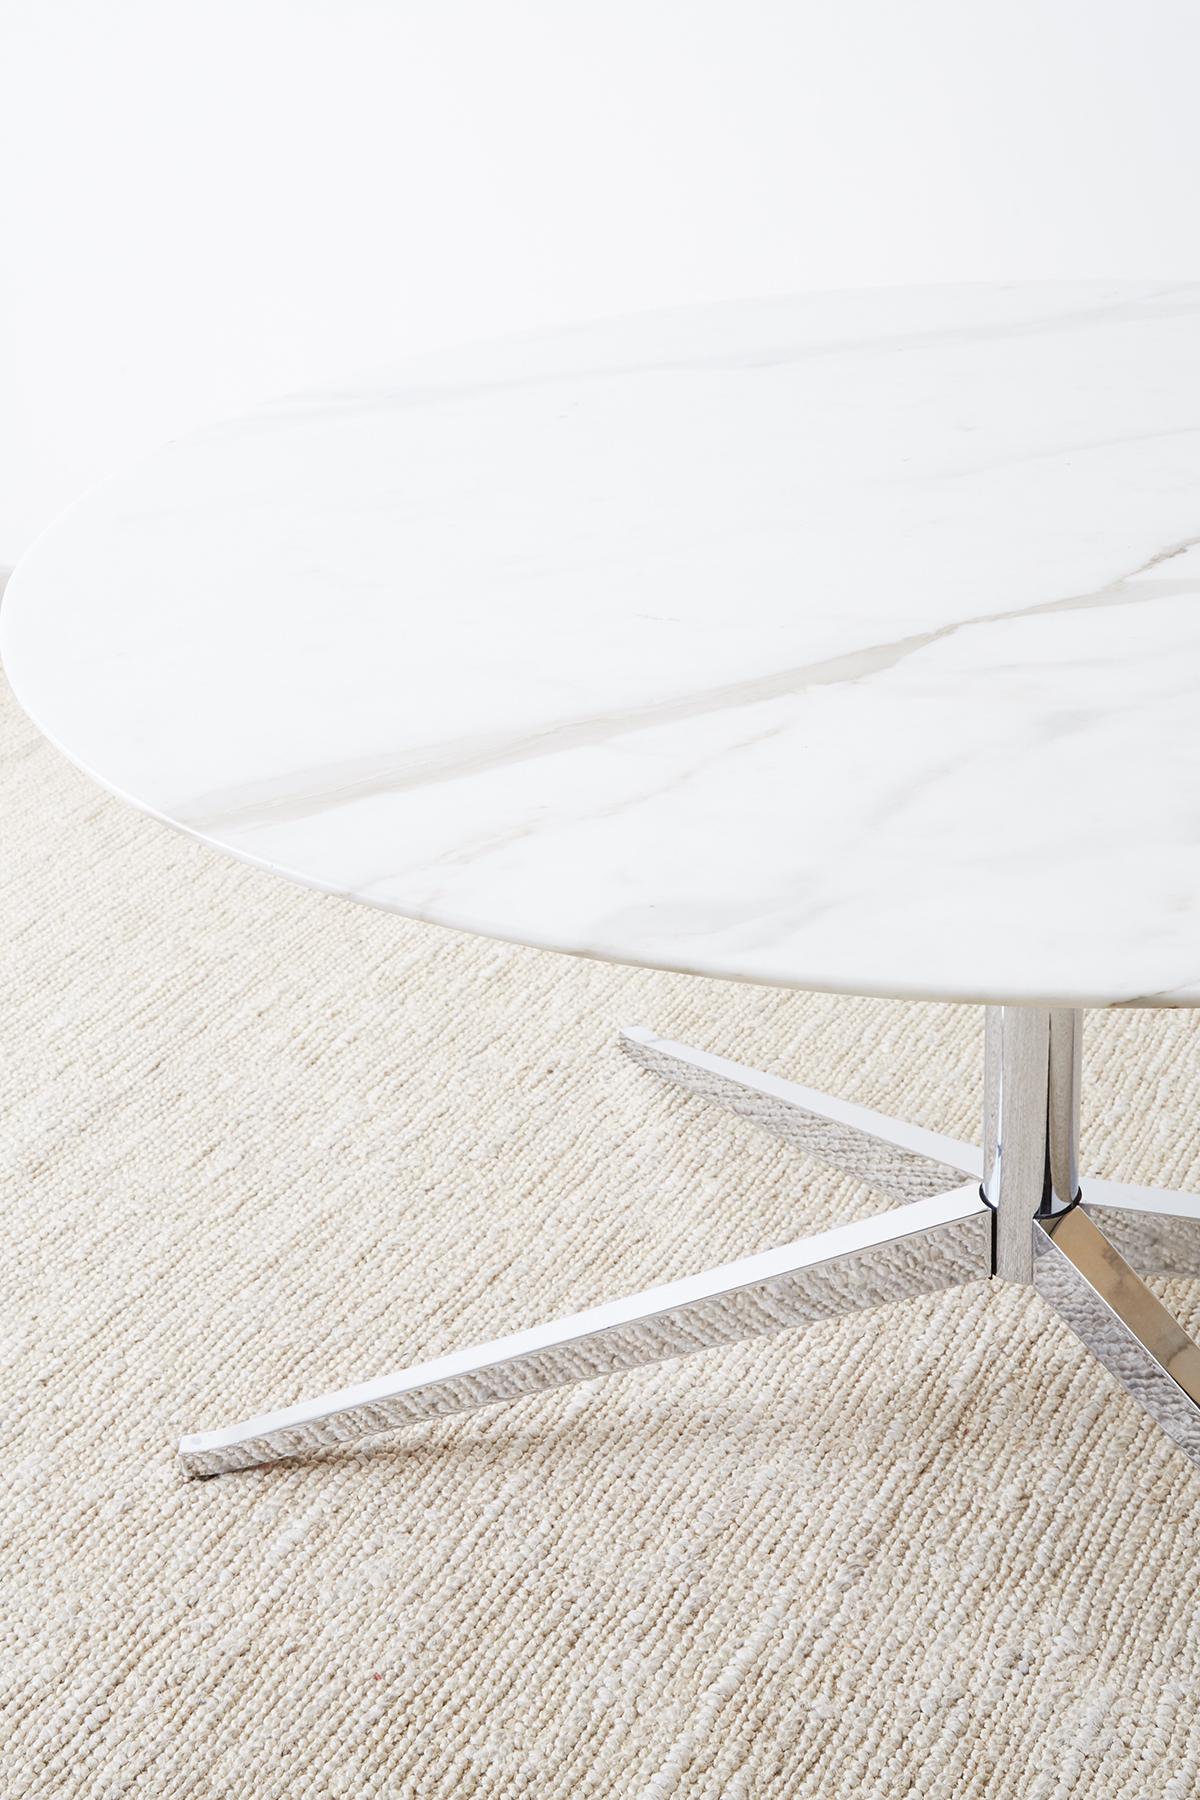 Florence Knoll Marble Dining Table with Star Base 1